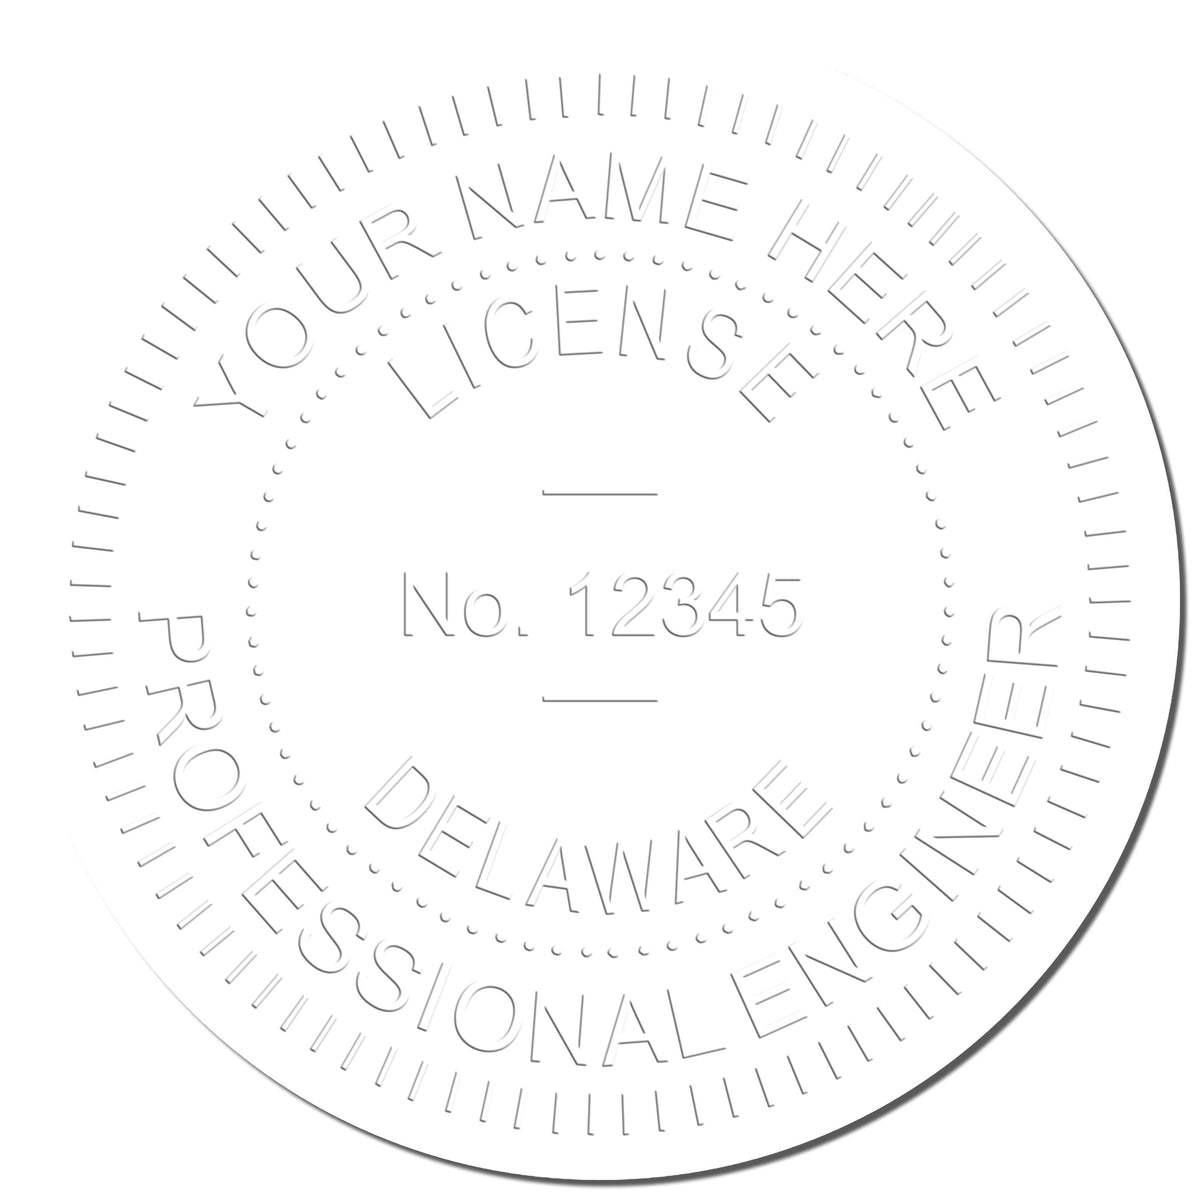 This paper is stamped with a sample imprint of the State of Delaware Extended Long Reach Engineer Seal, signifying its quality and reliability.